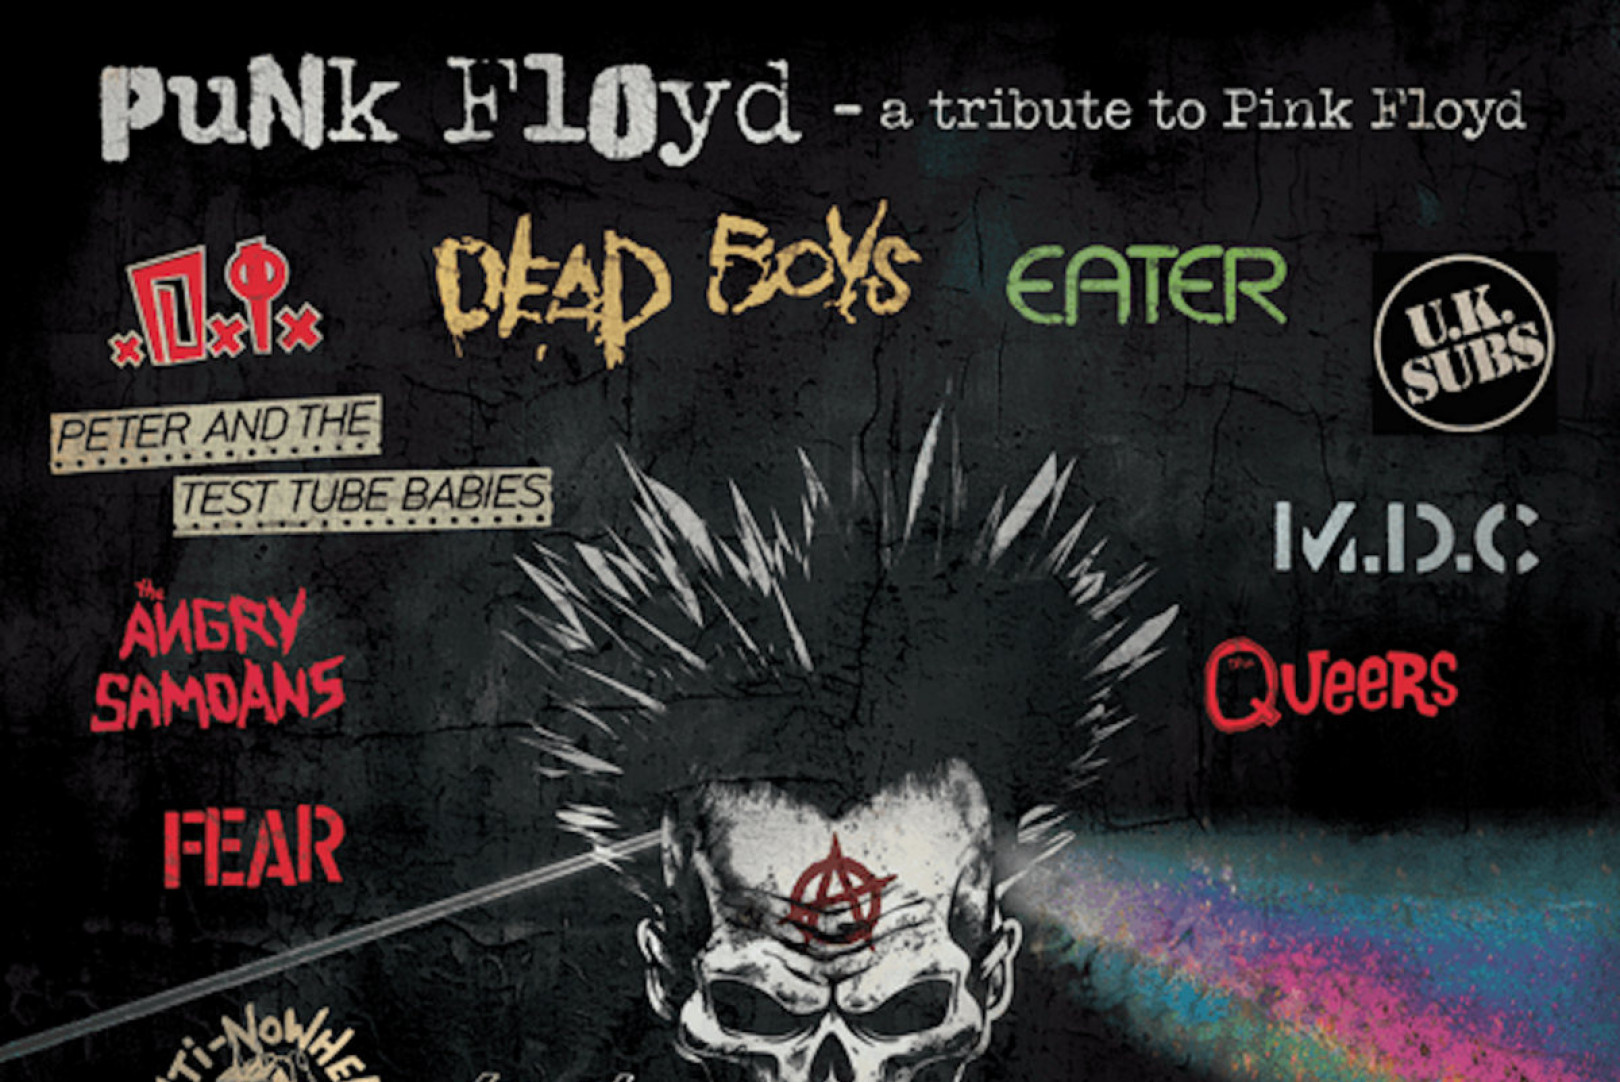 Uk Subs, FEAR, Dead Boys, MDC, Eater, DI, Queers on Pink Floyd tribute